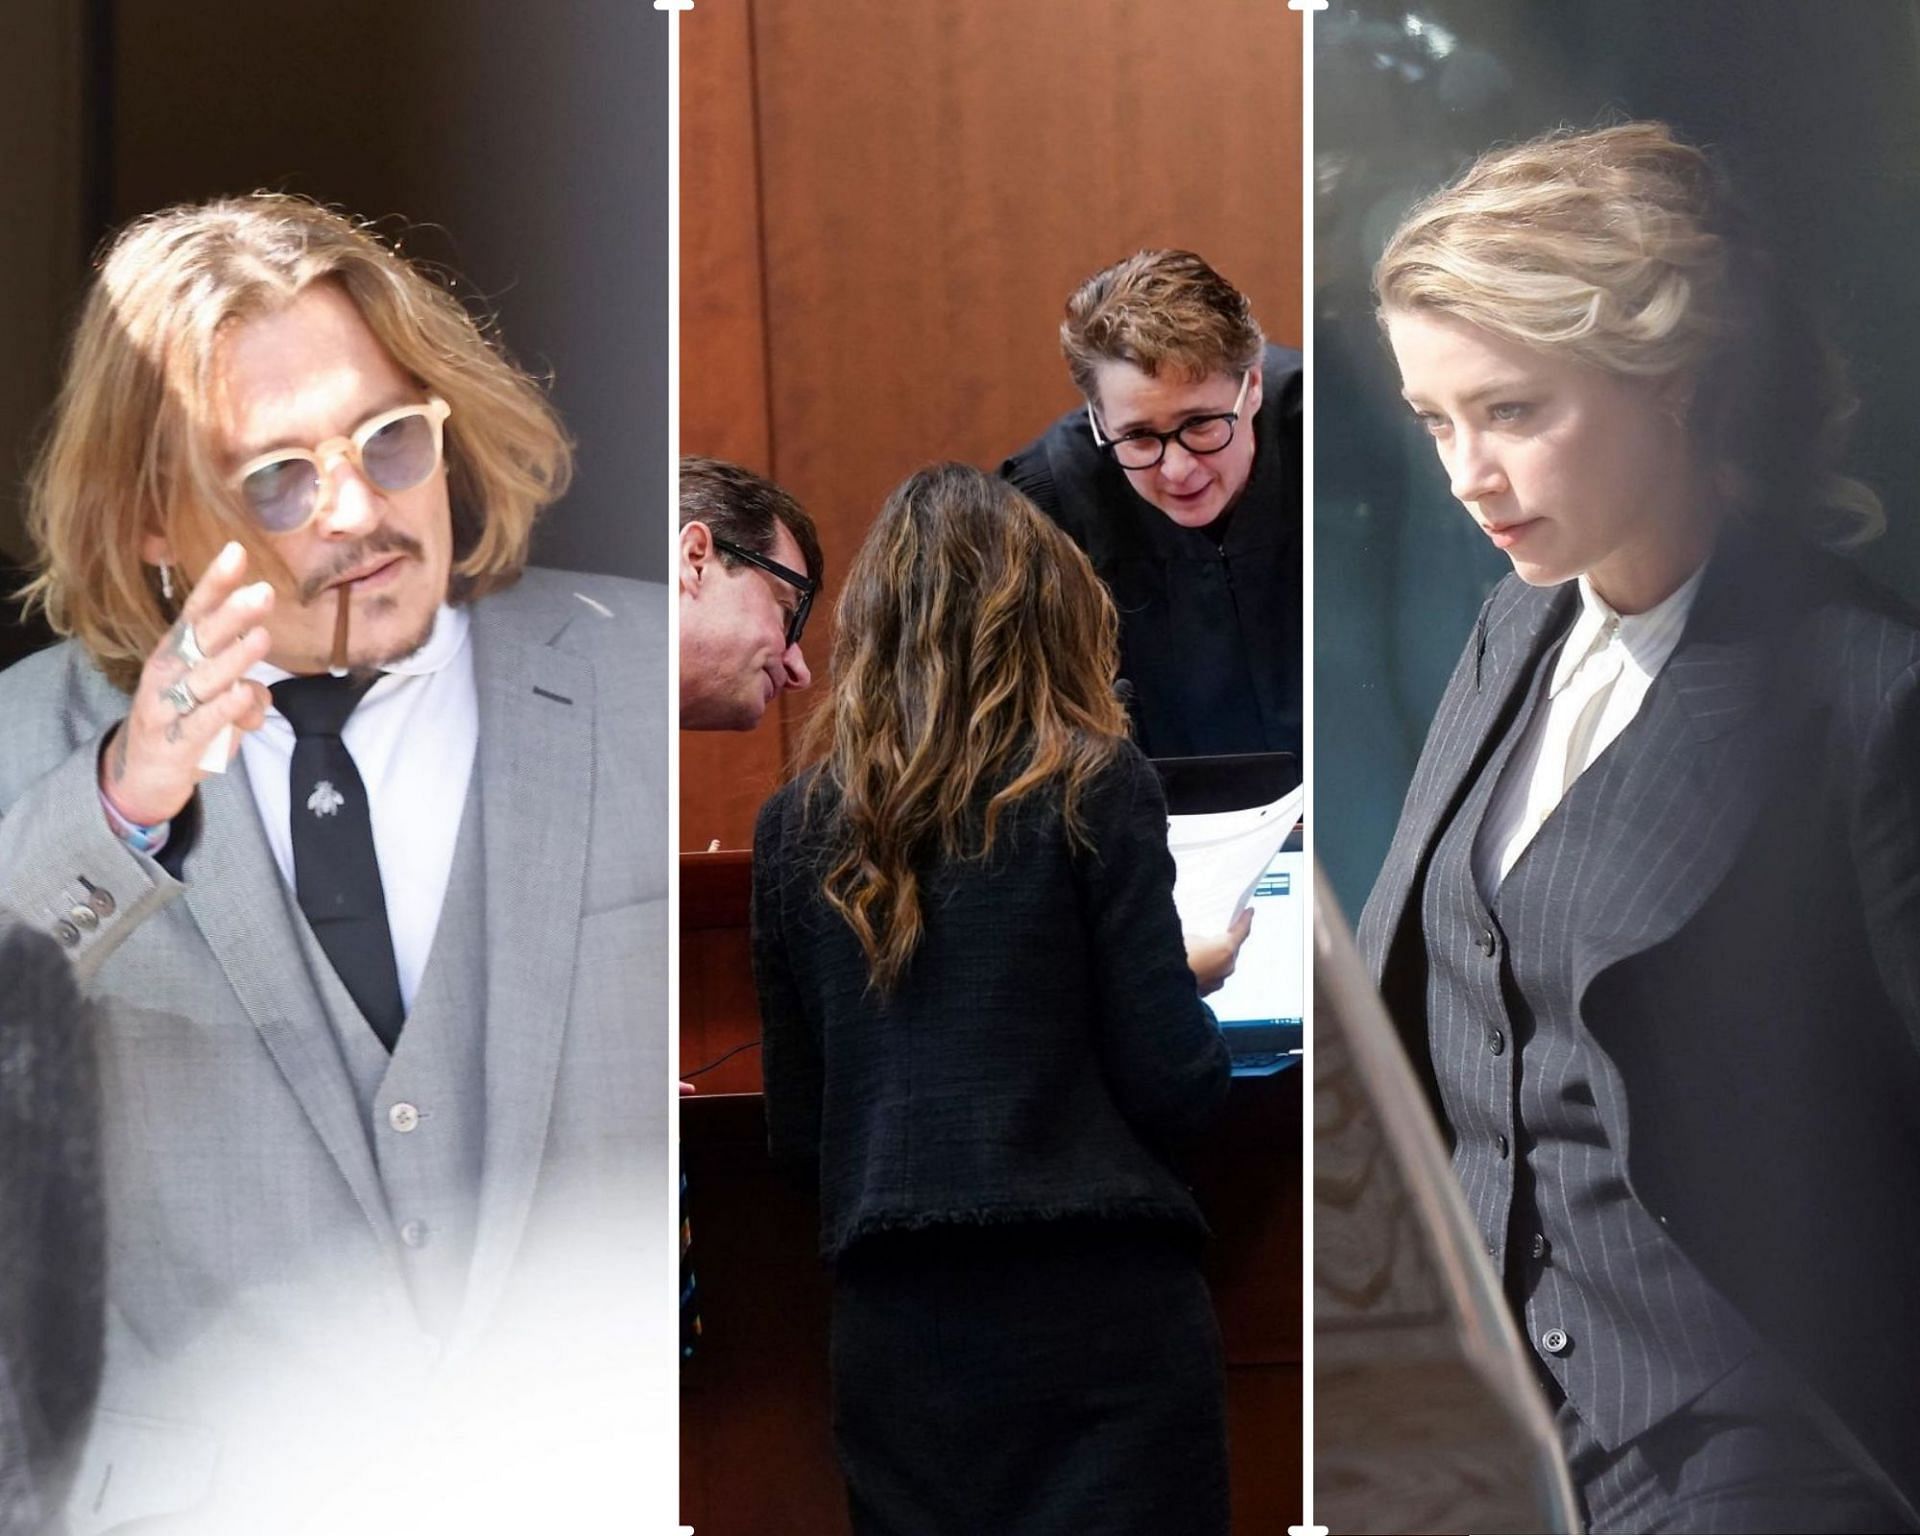 Johnny Depp and Amber Heard outside court after closing arguments. (Images via Instagram/@justjared/Getty Images)